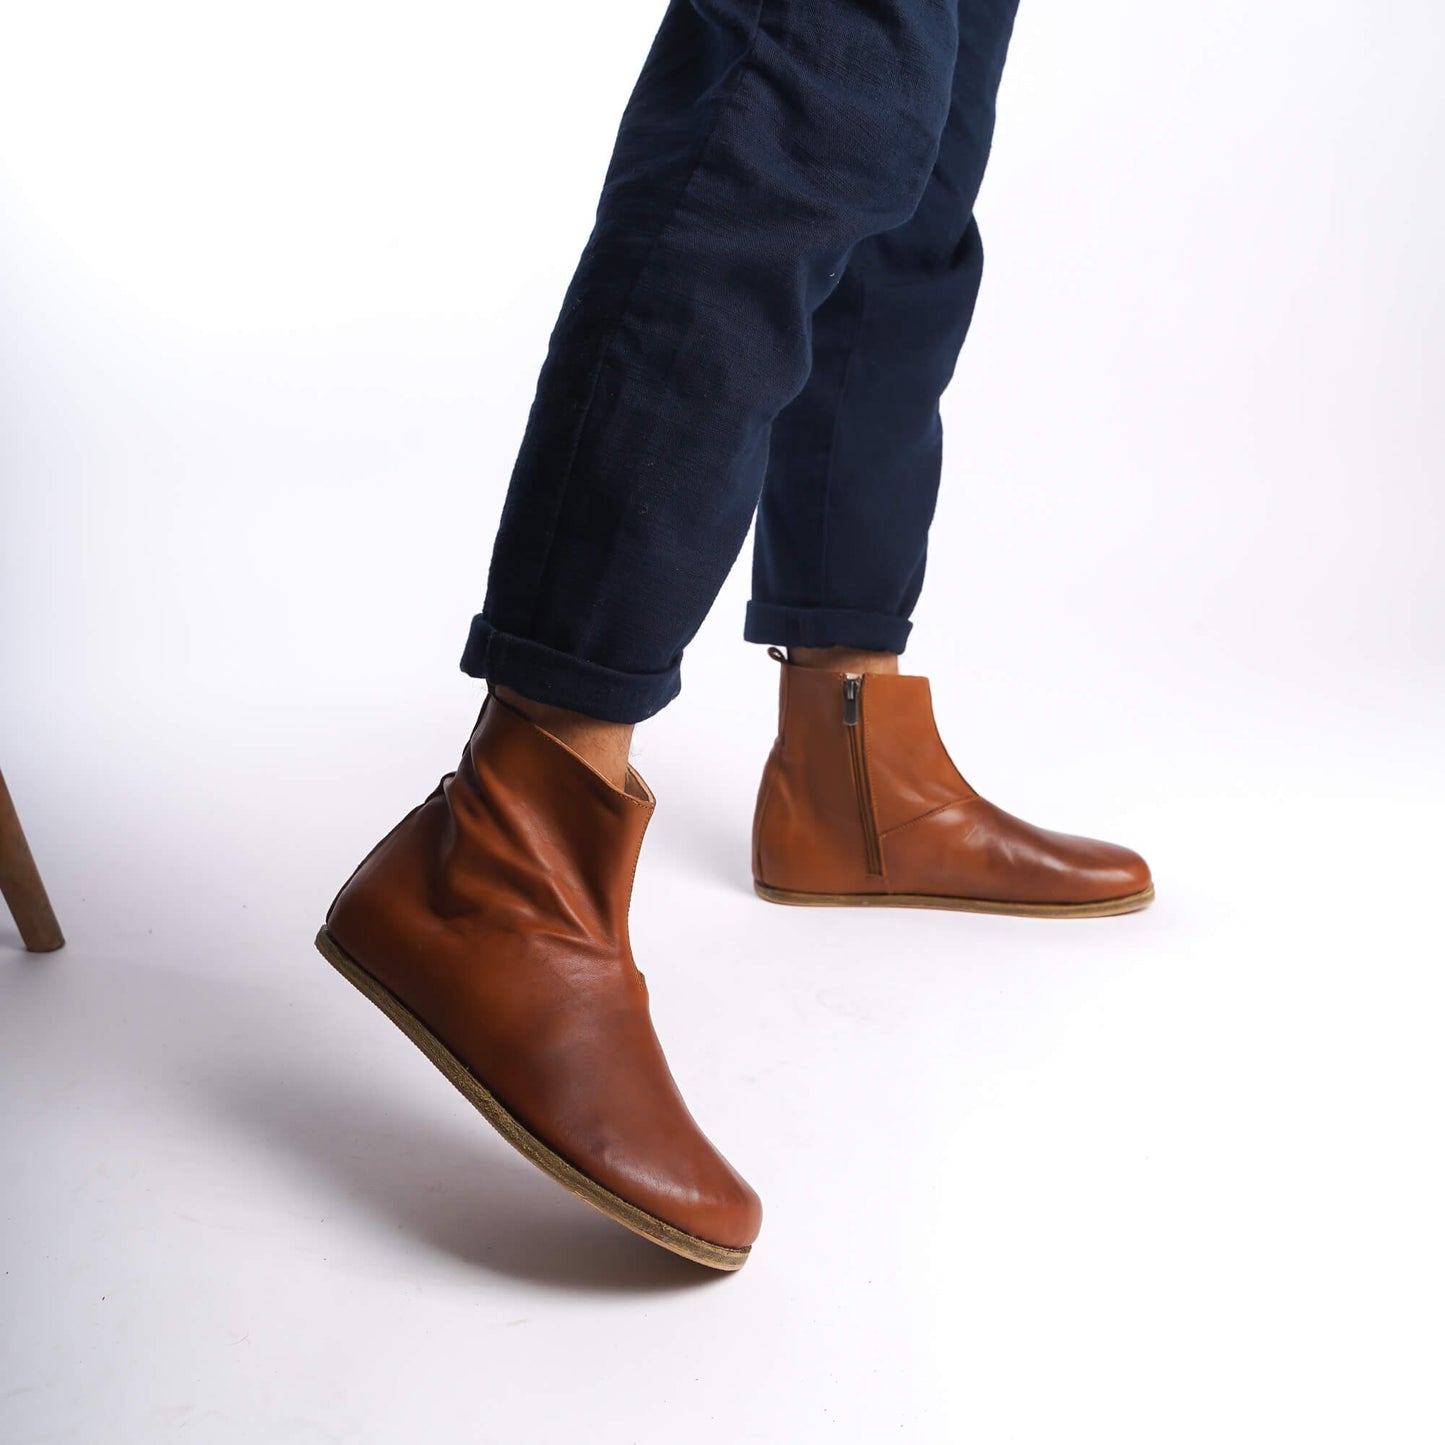 Men's tan brown genuine leather barefoot ankle boots, featuring a sleek side zipper for easy access.